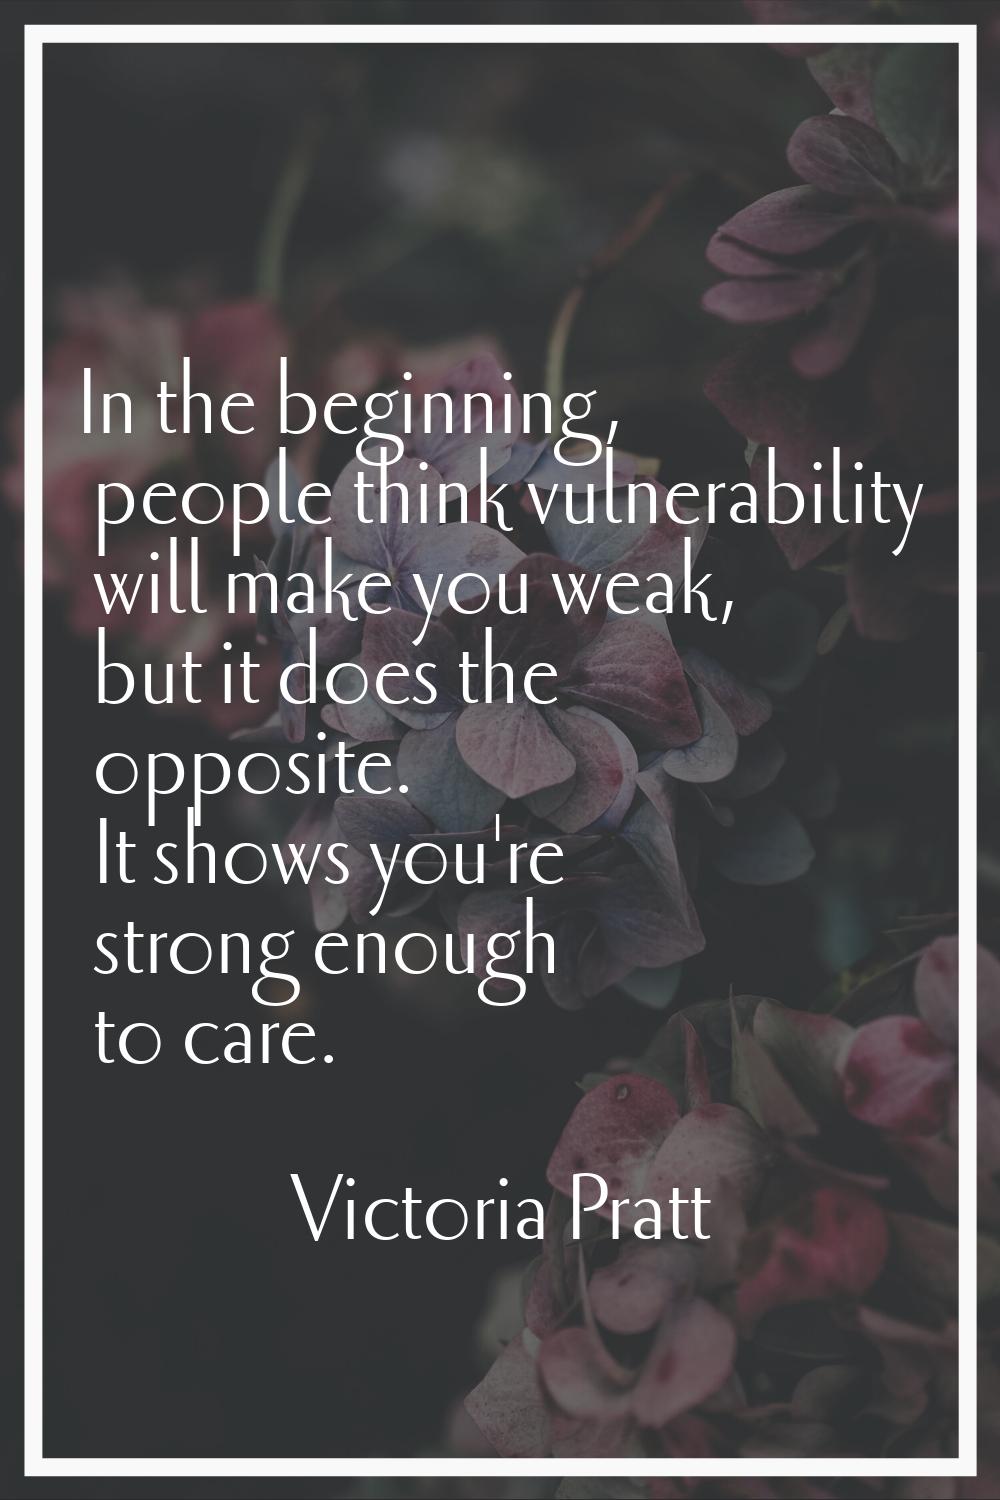 In the beginning, people think vulnerability will make you weak, but it does the opposite. It shows